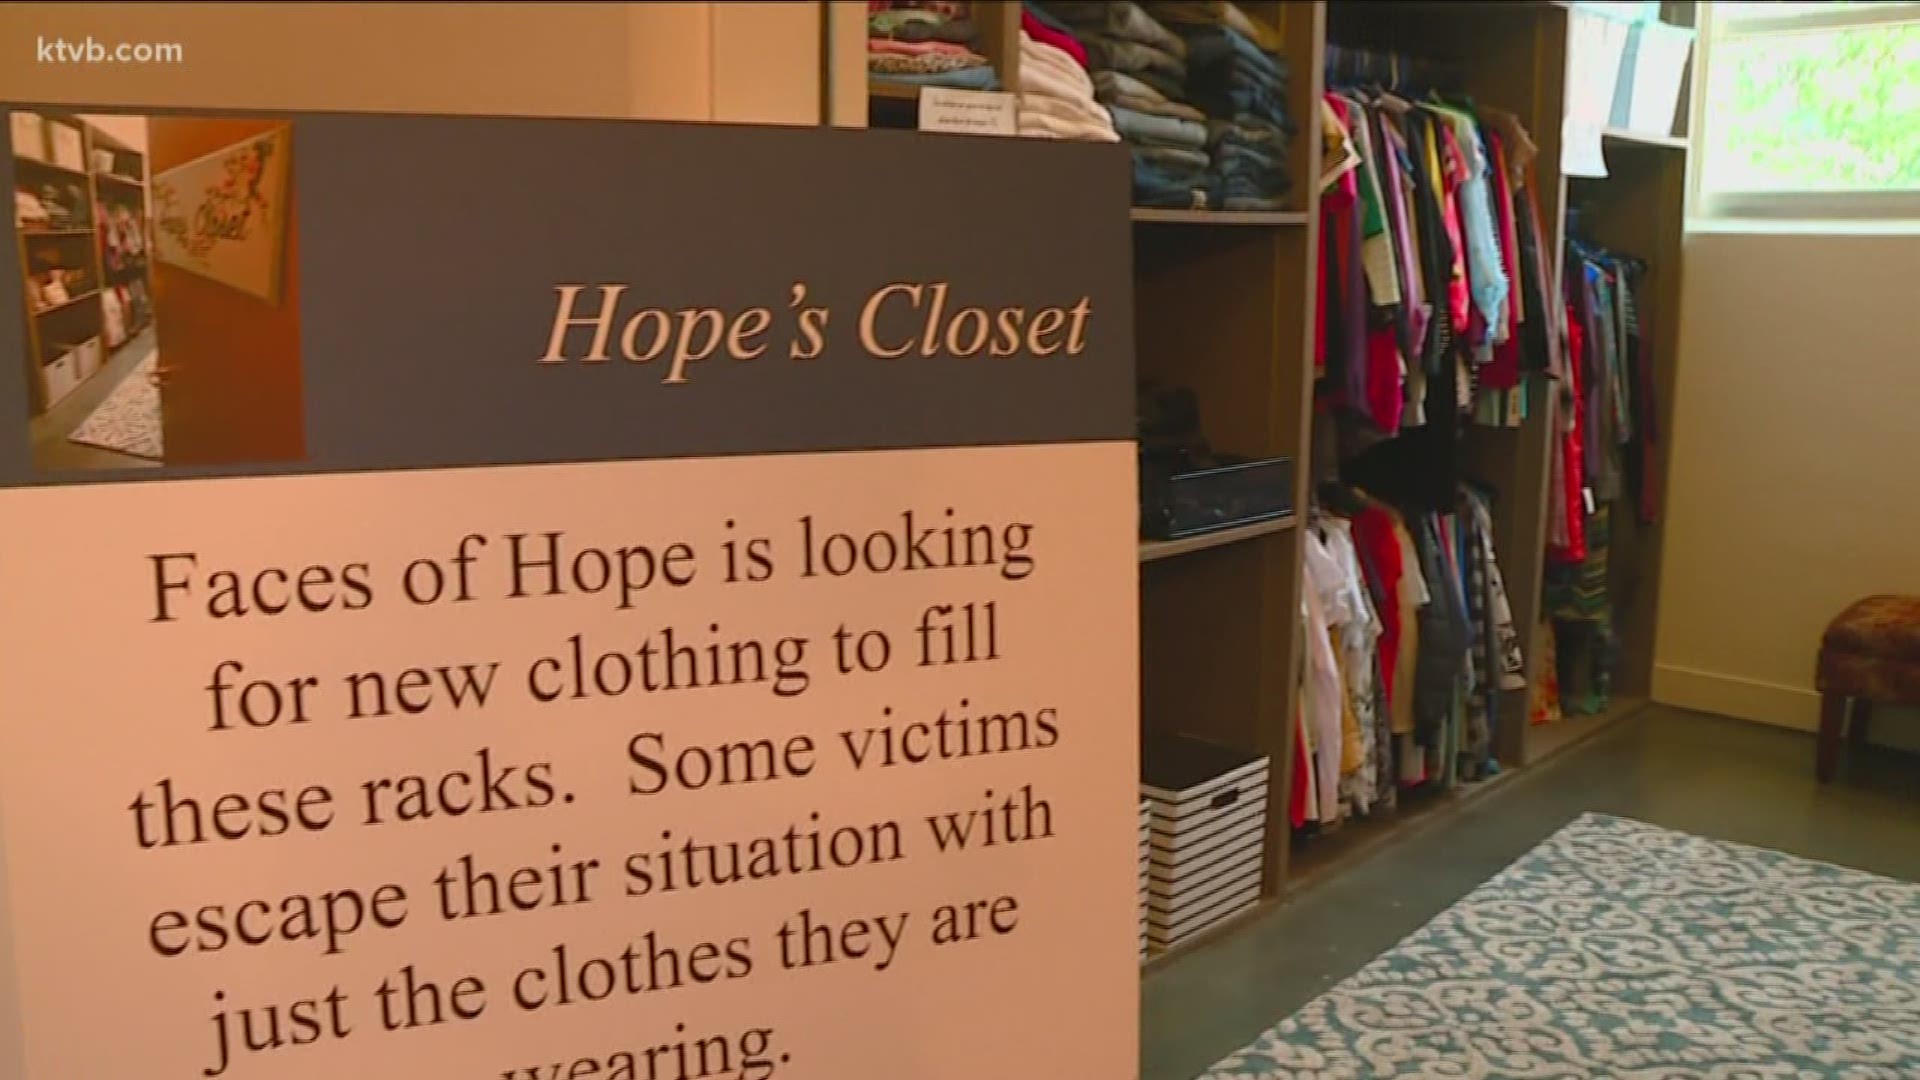 FACES expands footprint, services for victims.